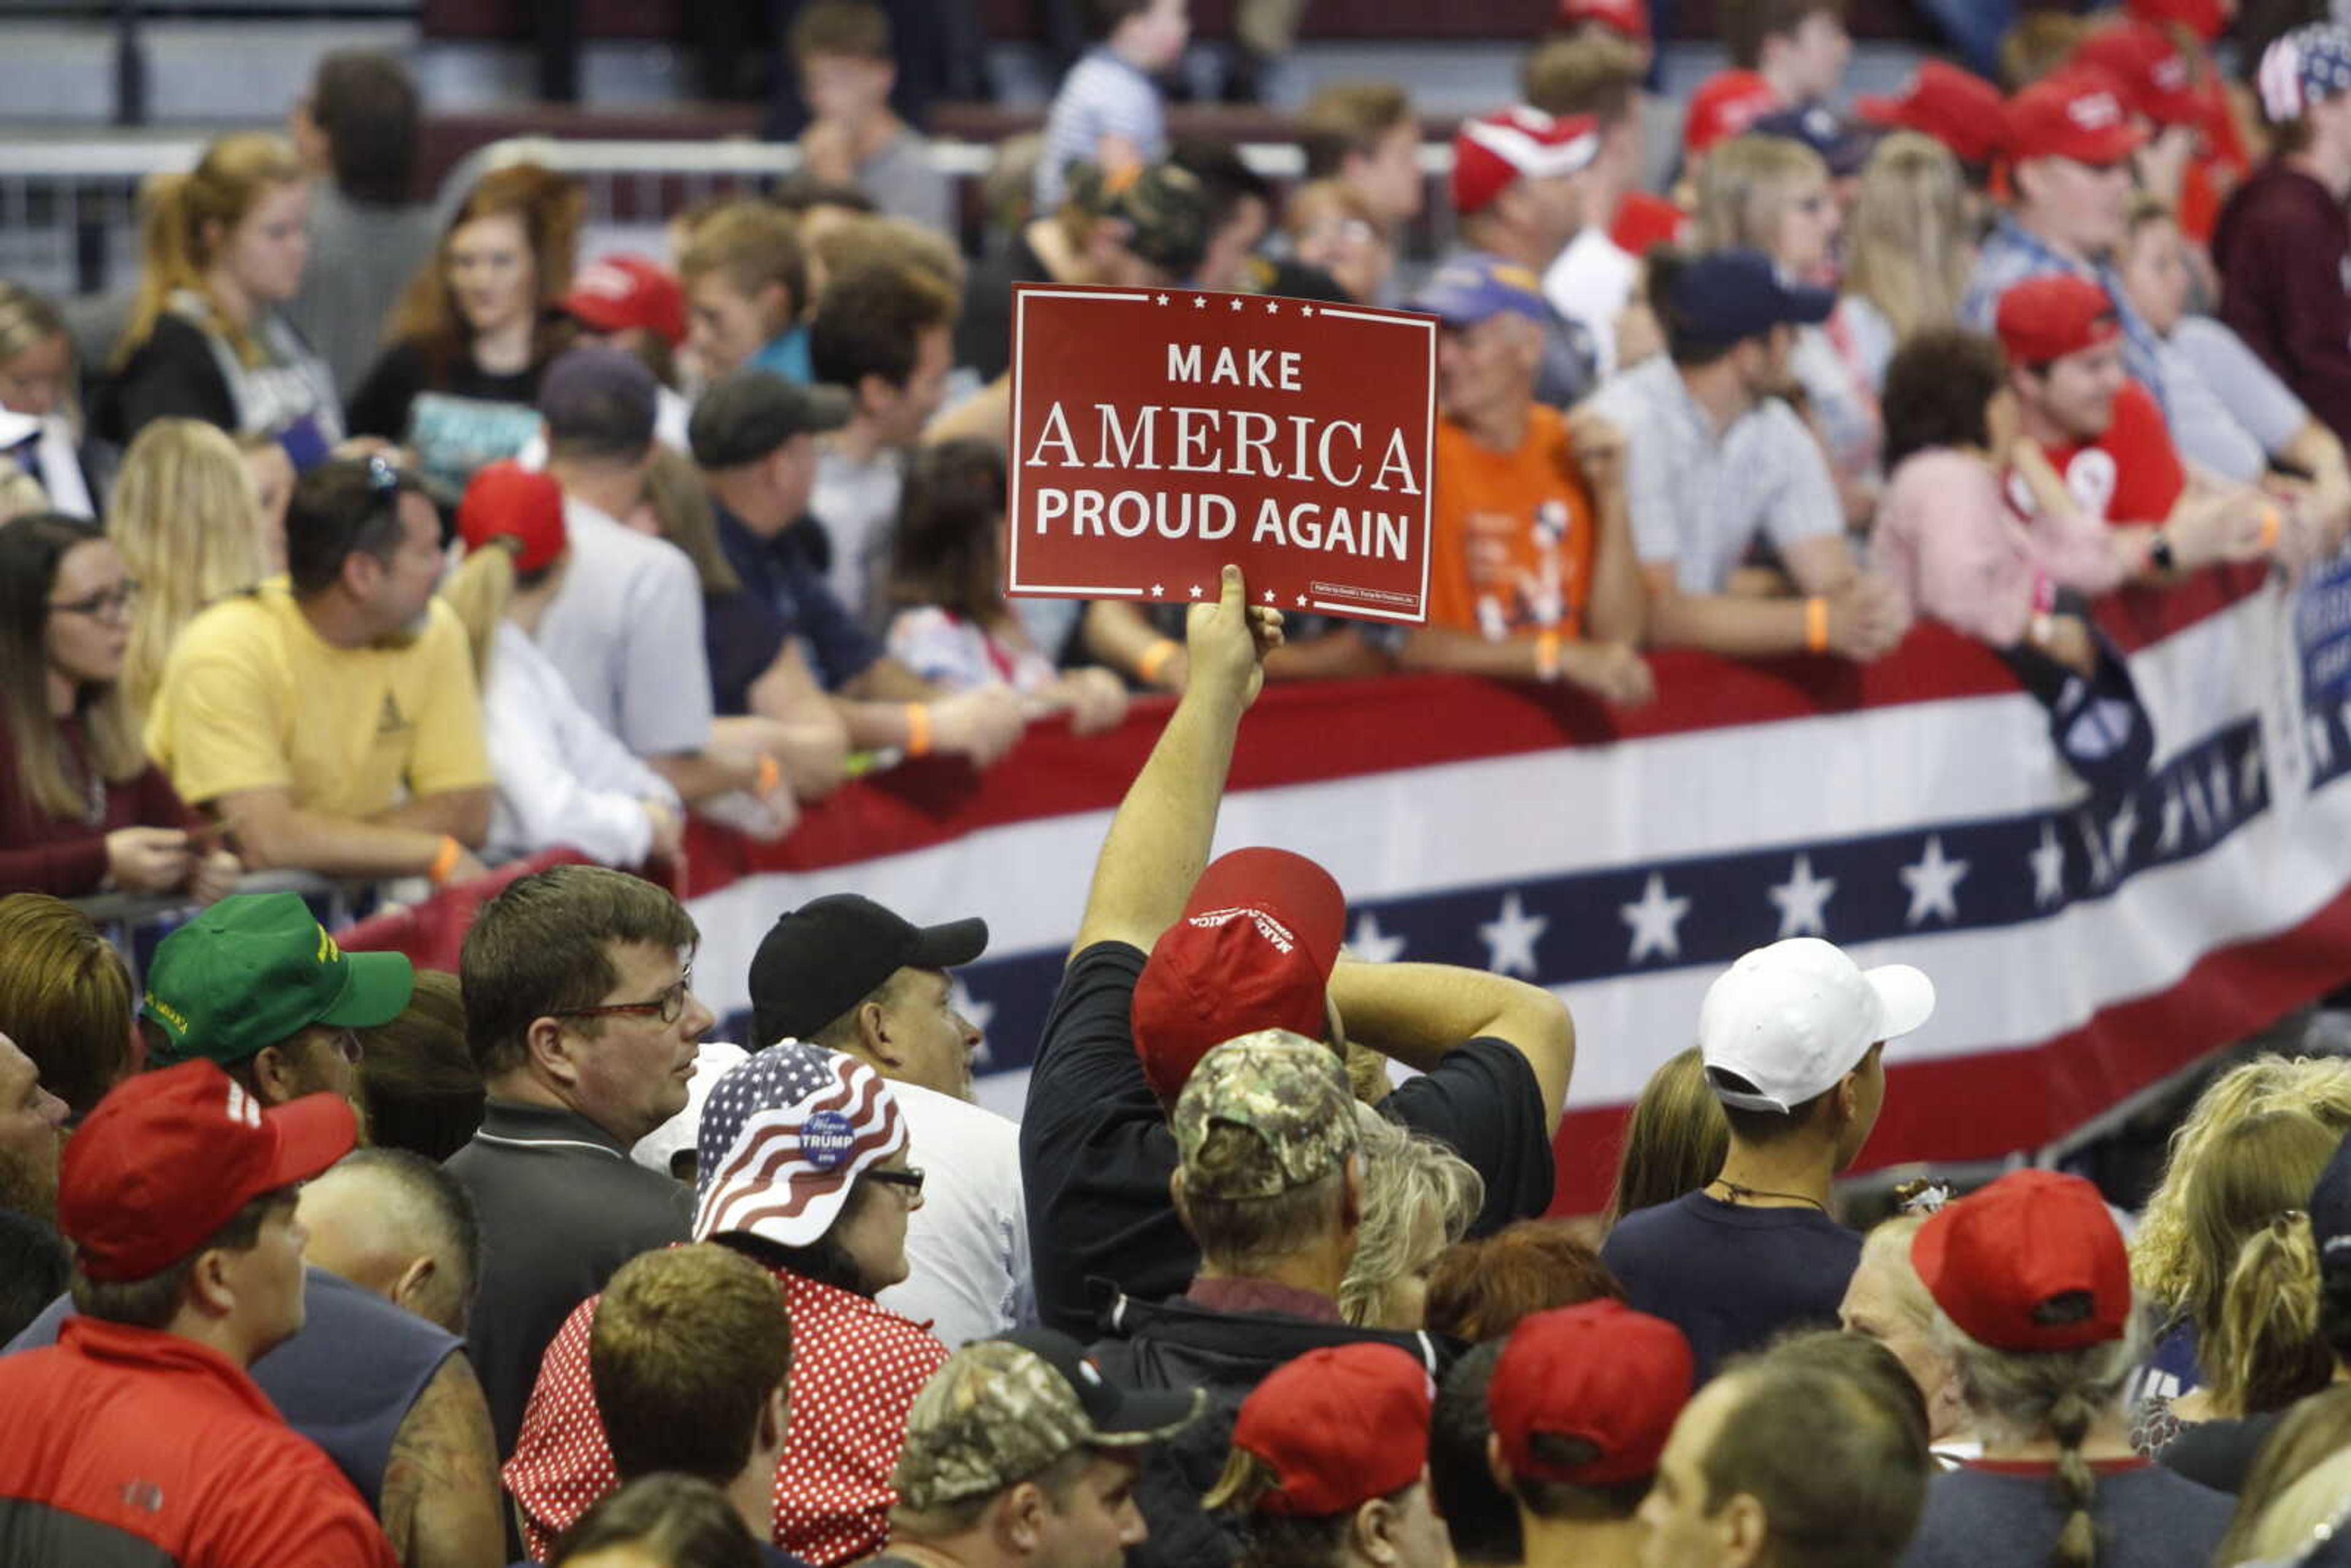 An attendee of President Trump's MAGA rally holds a "Make America Great Again" poster, distributed by Donald J. Trump for President, inc., before the rally started in JQH Arena on Sept. 21.